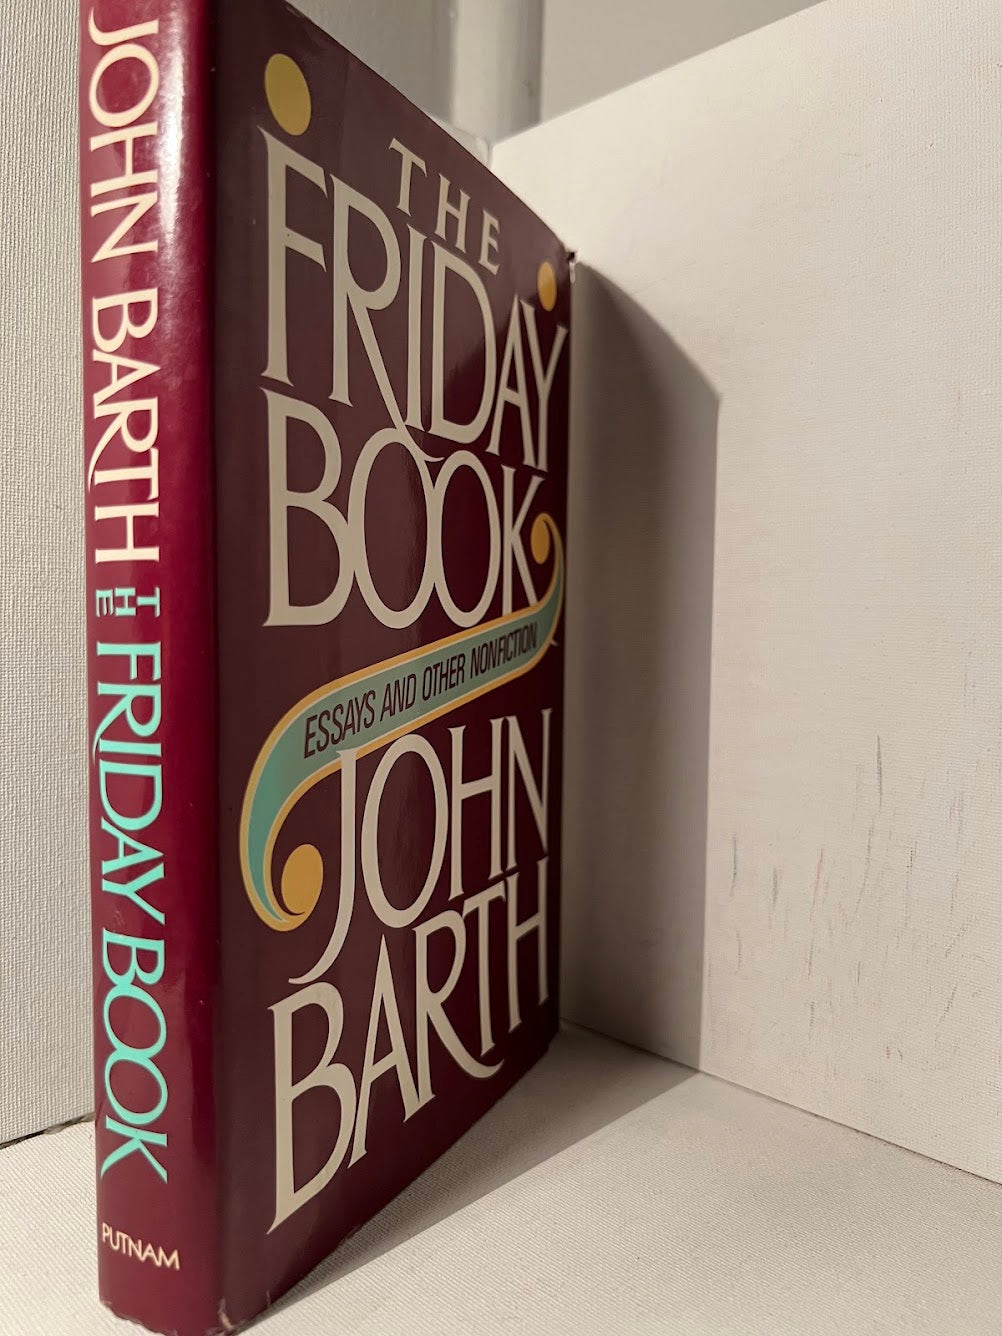 The Friday Book by John Barth